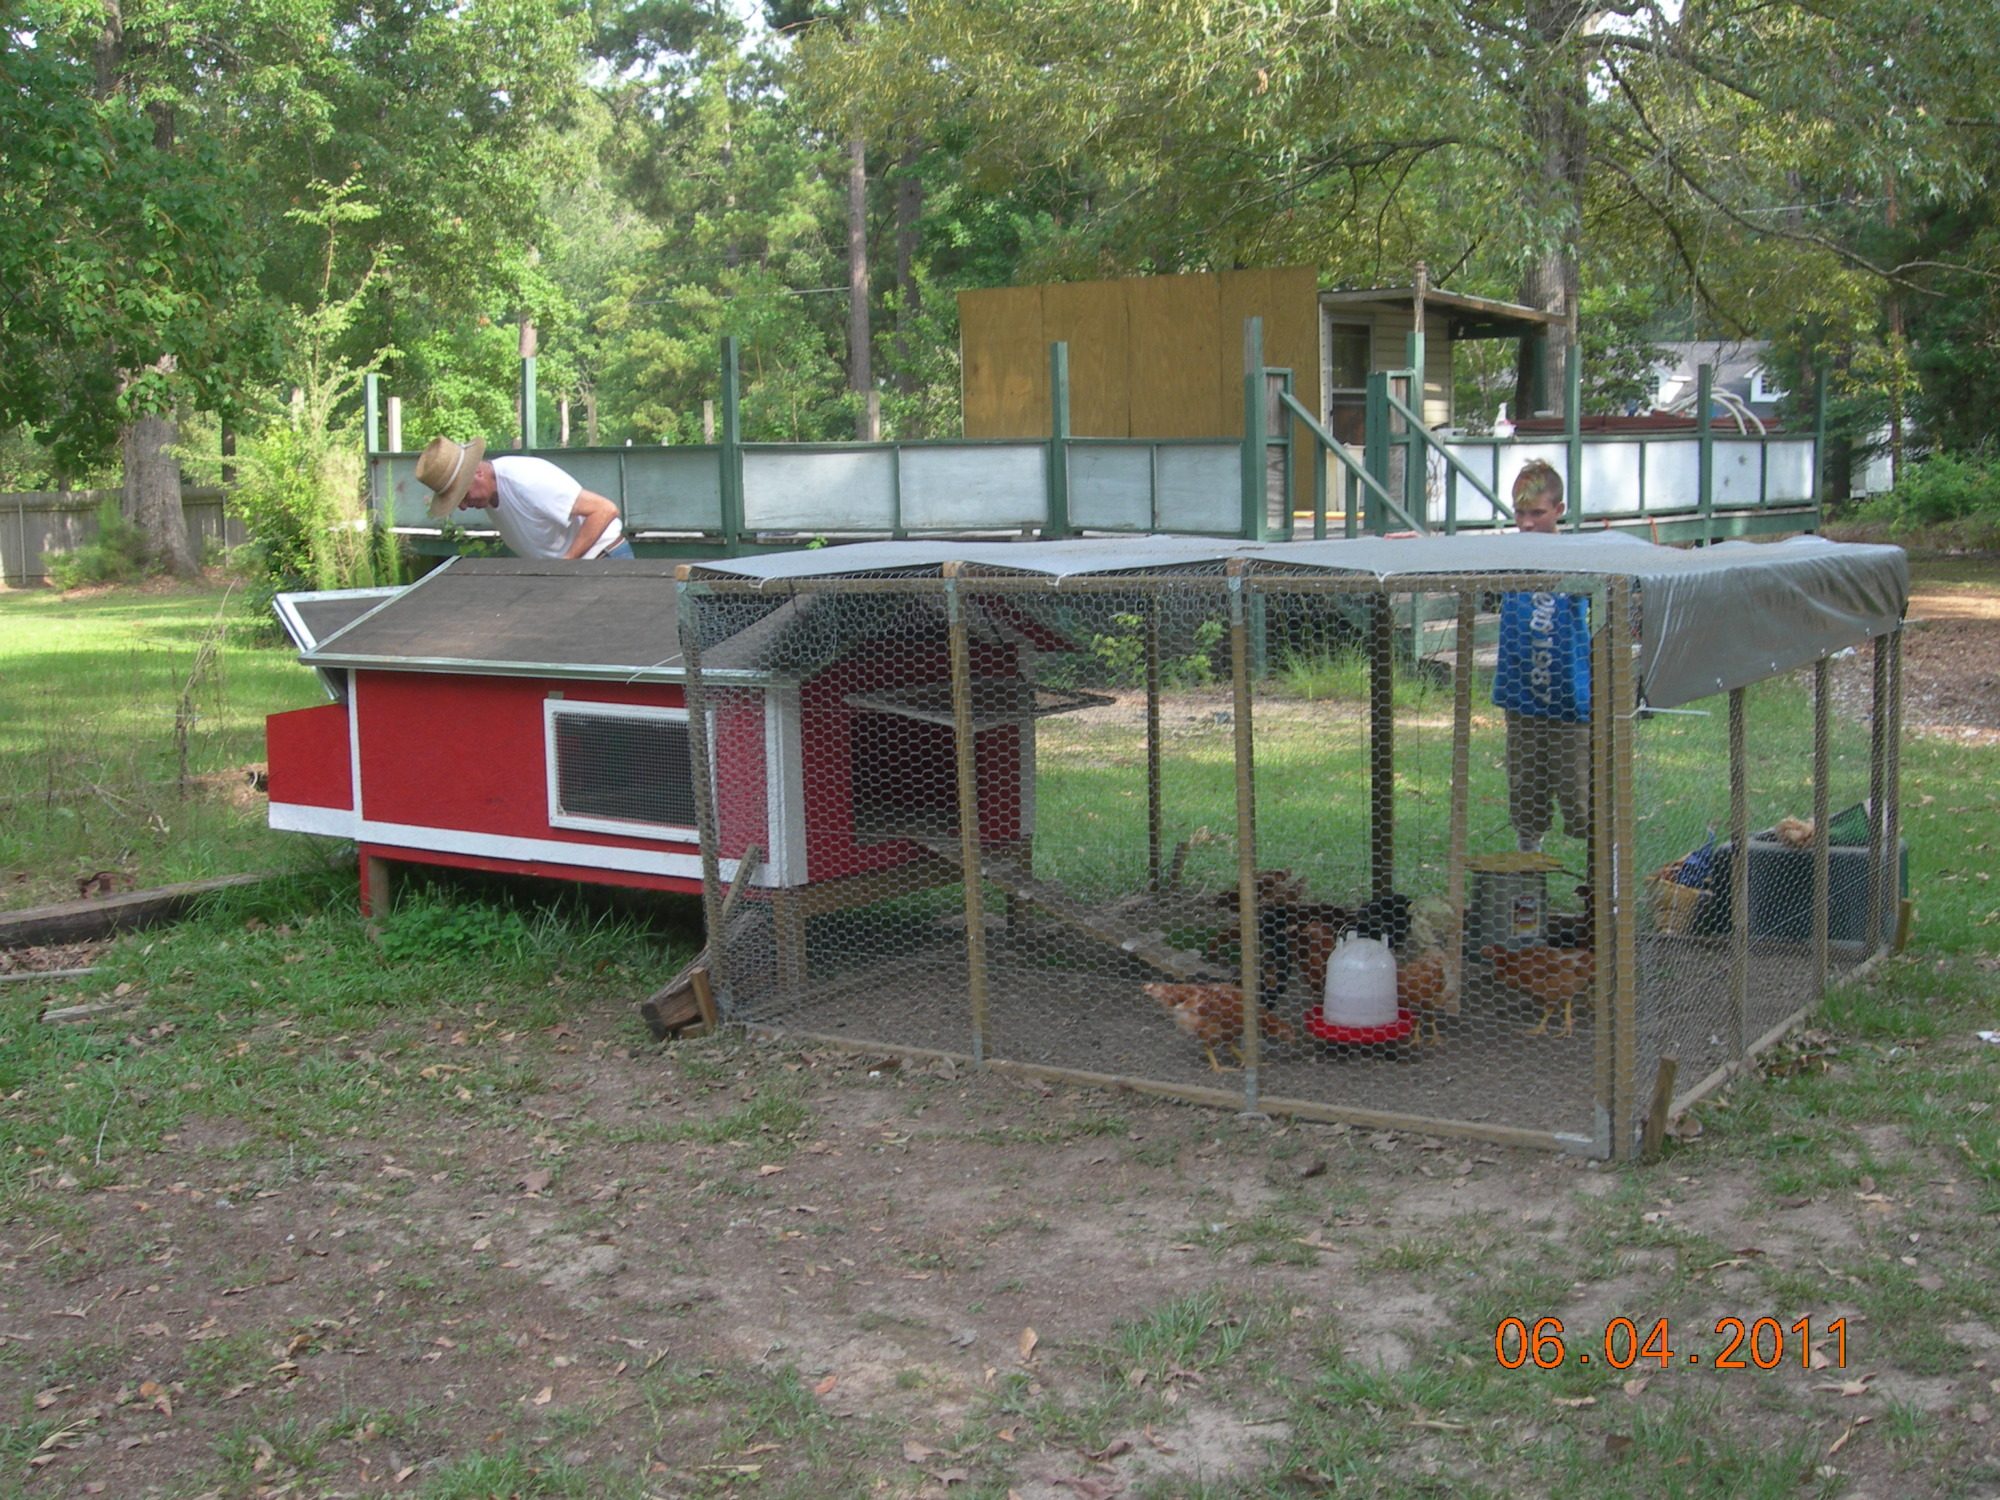 My brand new and first atempt to build a chicken coop from scratch.